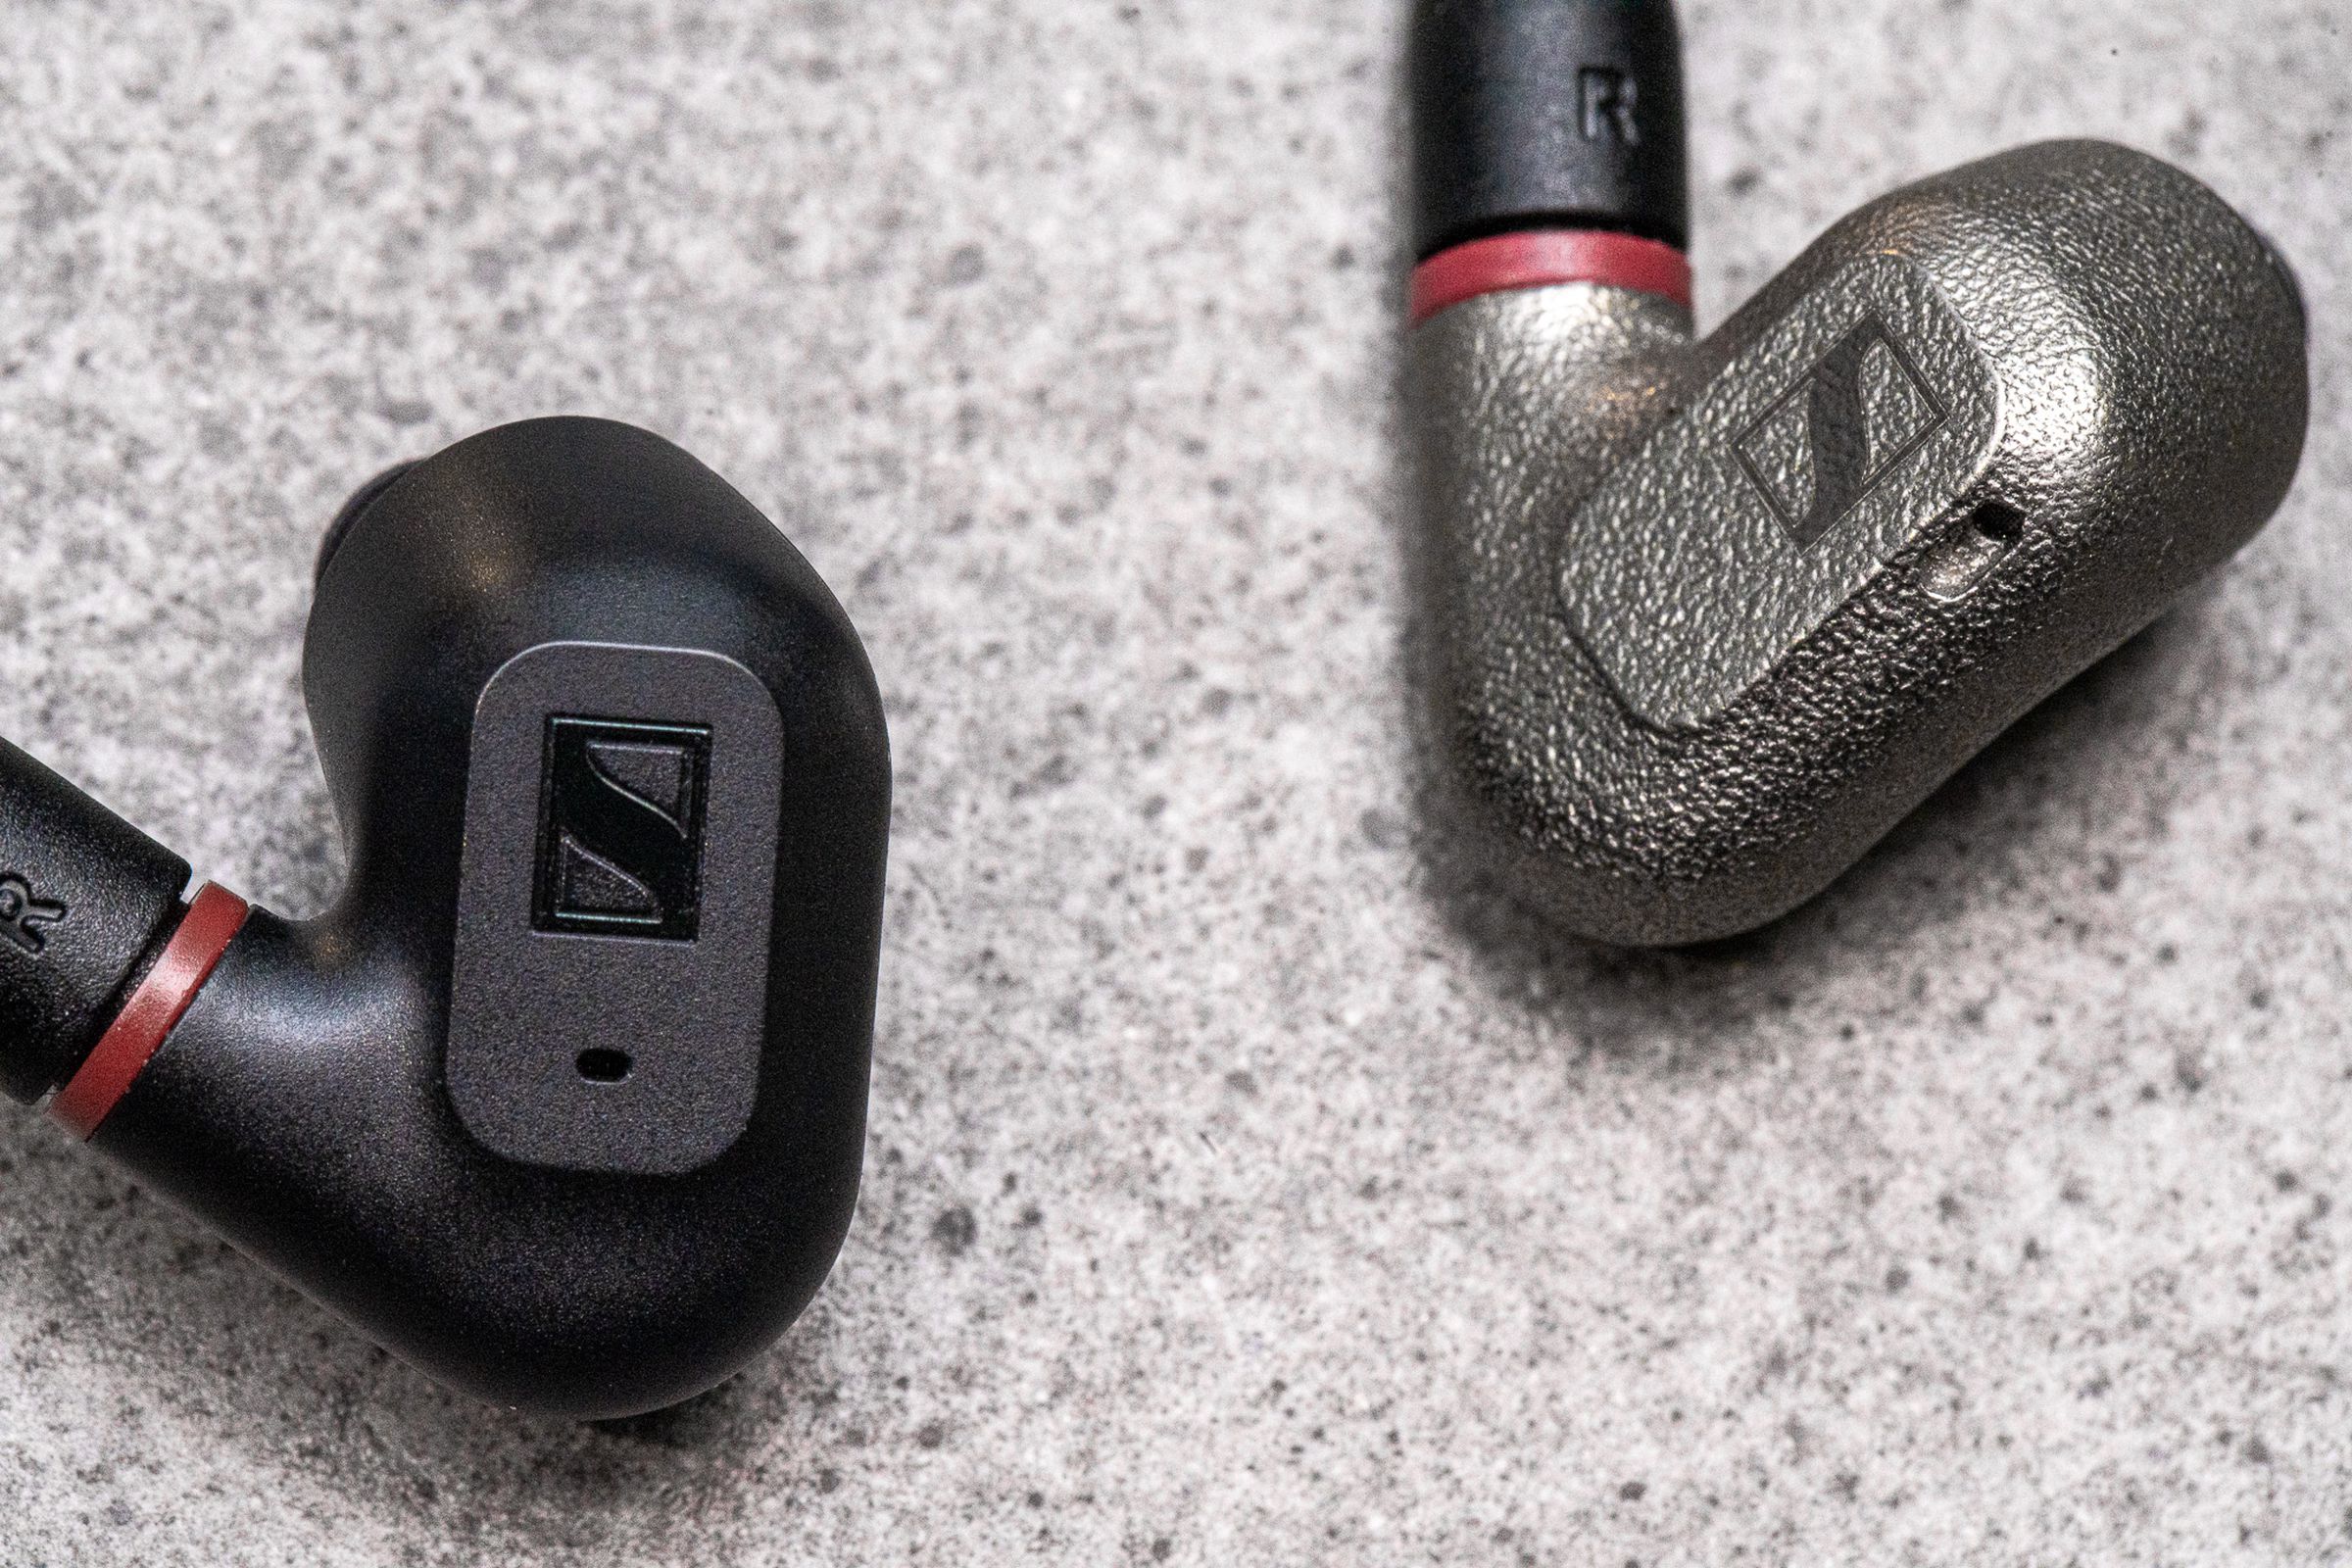 A photo comparing the housing material of Sennheiser's IE 200 and IE 600 headphones.